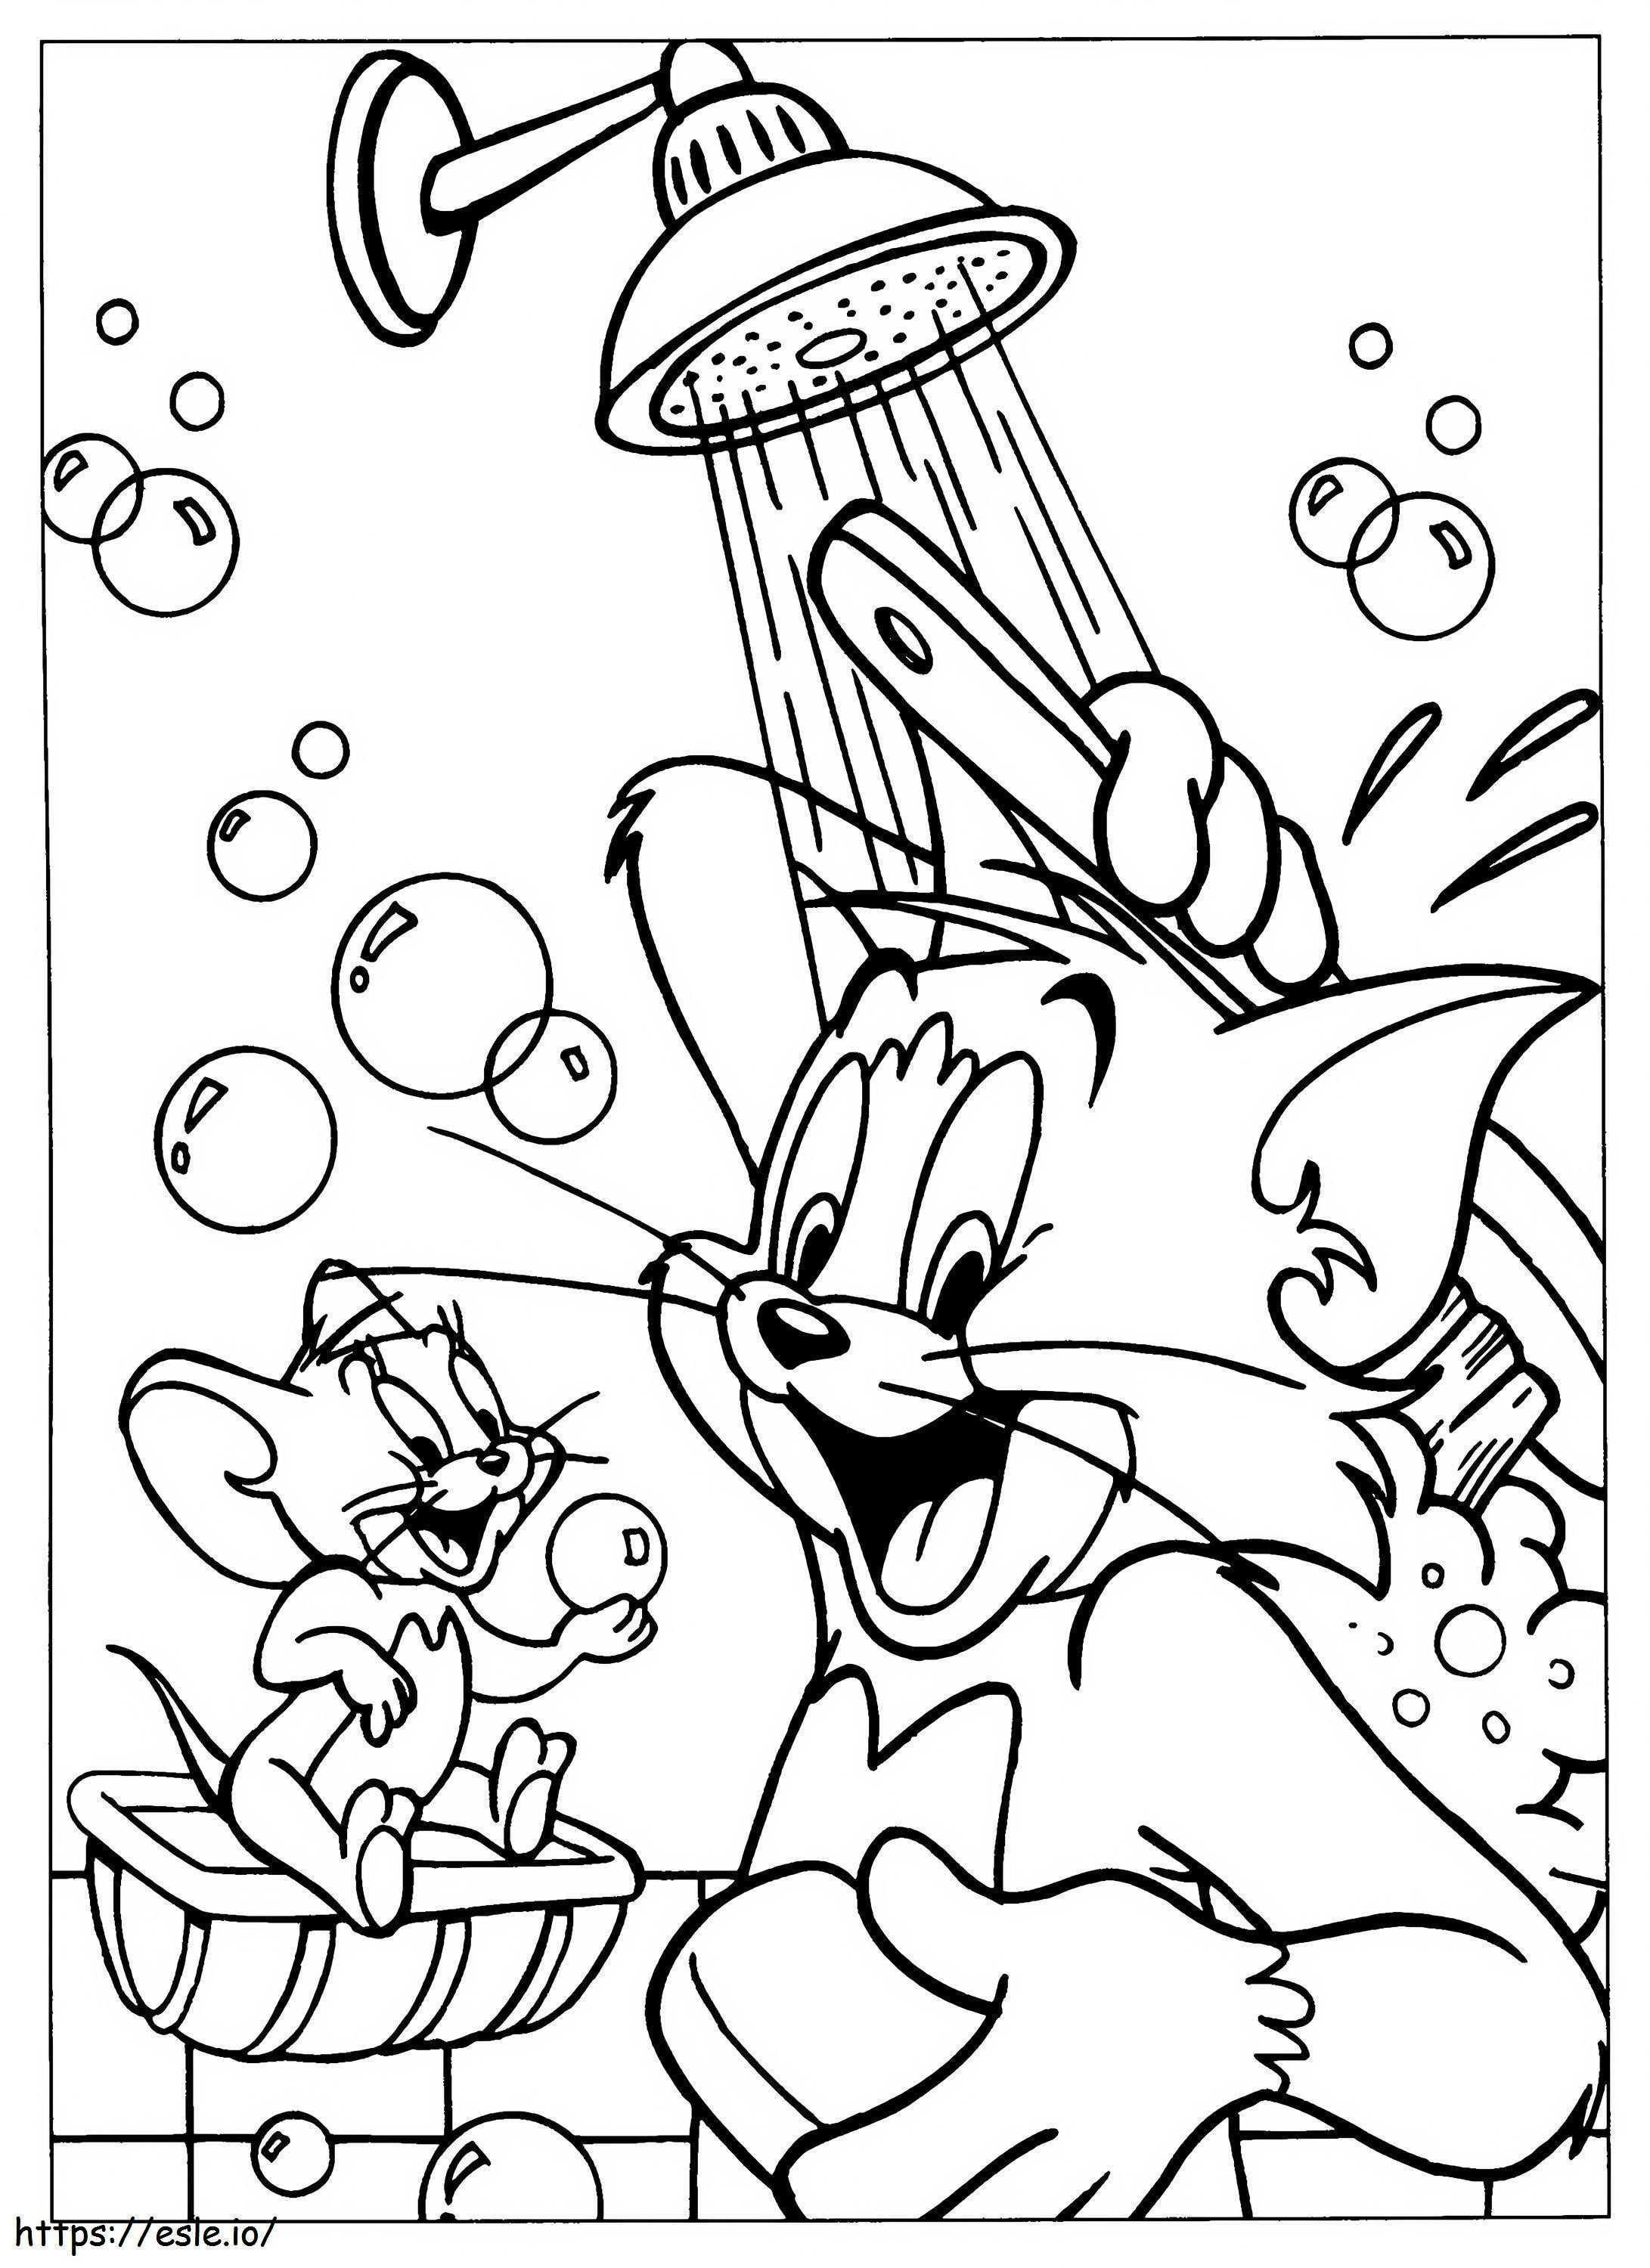 1548378094 Tom And Jerry For Kids Scaled 2 coloring page